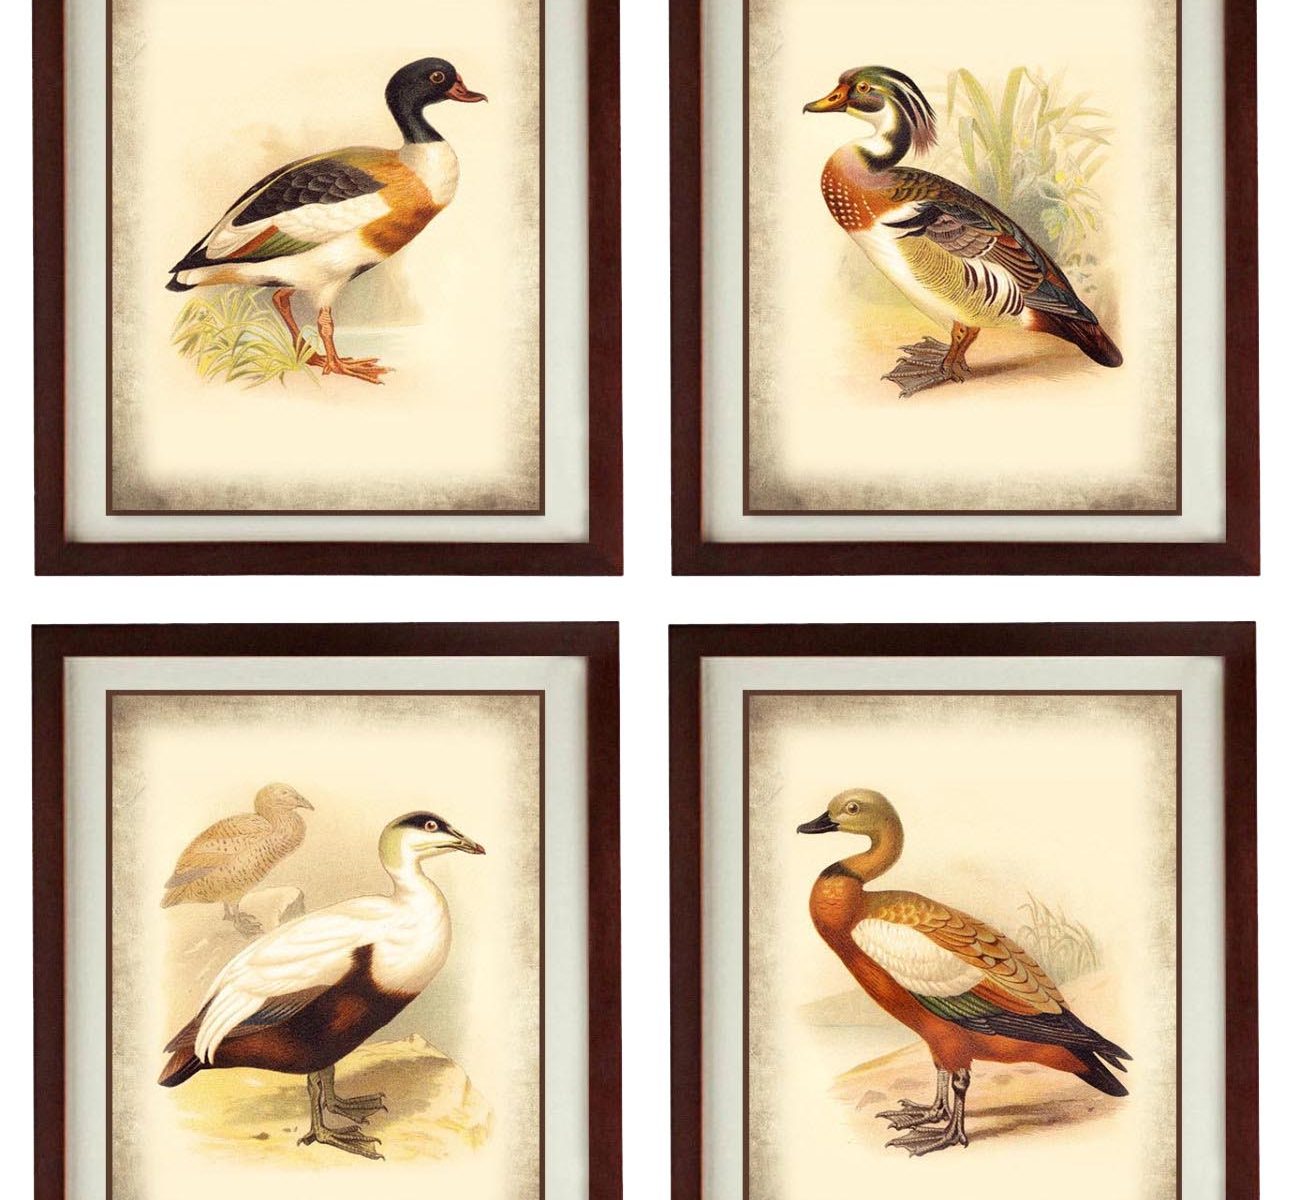 INSTANT DOWNLOAD Vintage Bird Duck illustration Set of 4 Parchment Style Prints Poster Antique Drawing Old Book Page Plate Printable Art